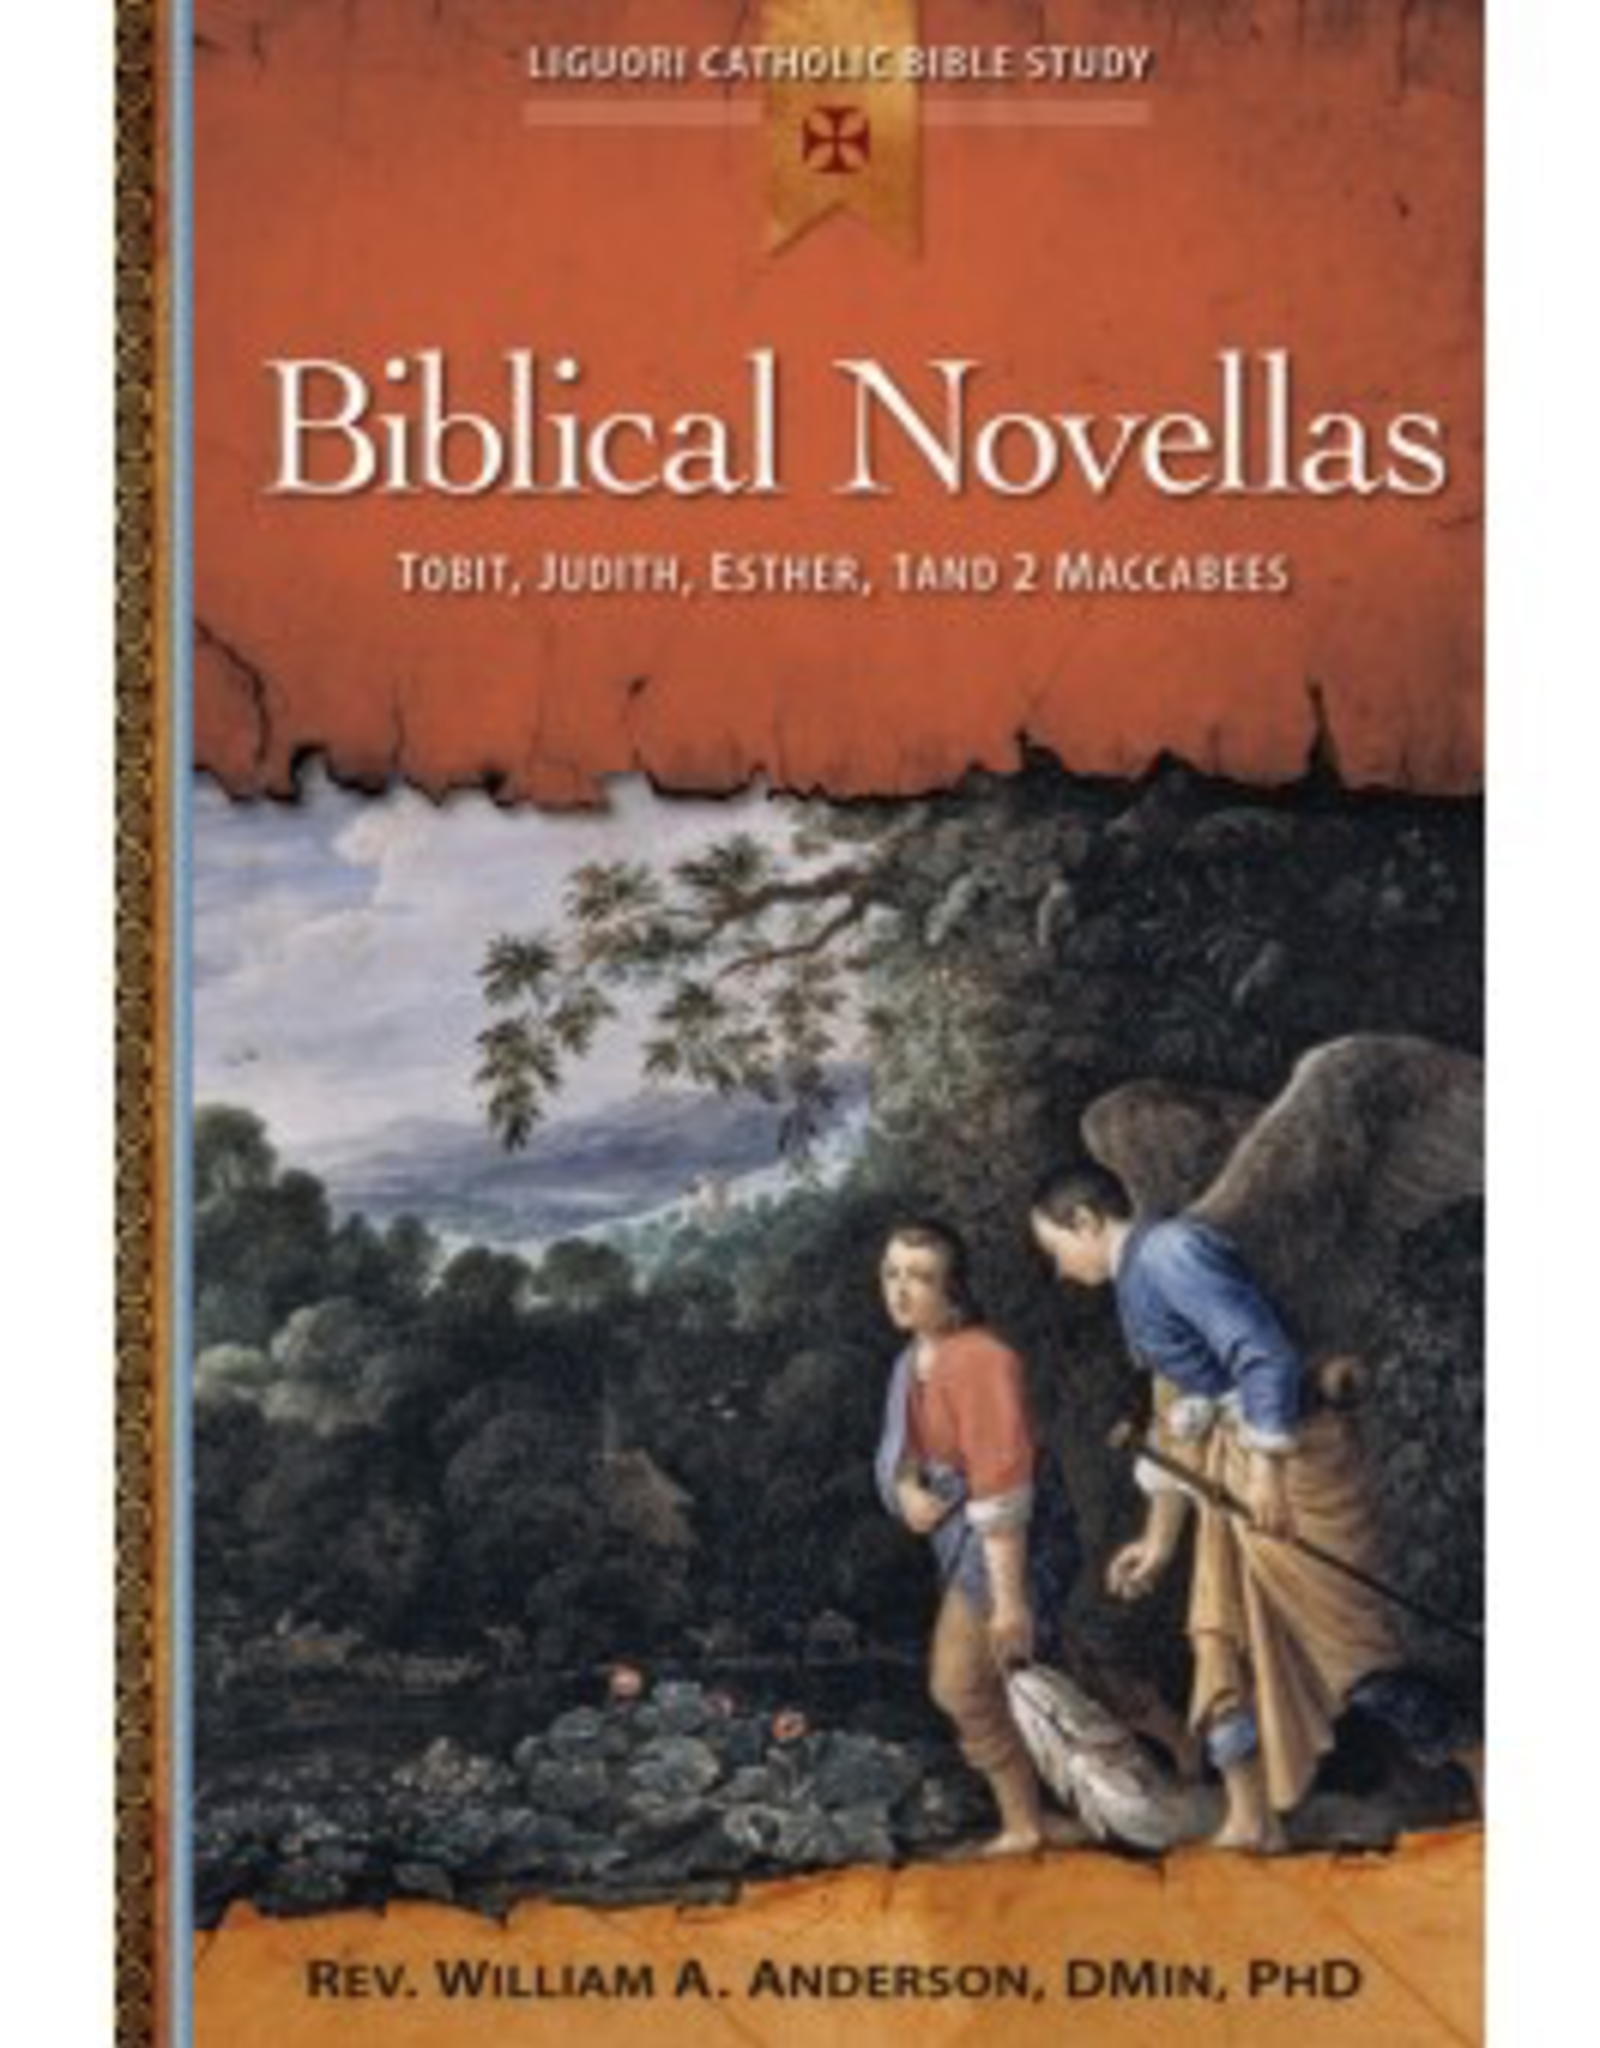 Liguori Biblical Novellas:  Tobit, Judith, Esther, 1 and 2 Maccabees, by William Anderson (paperback)